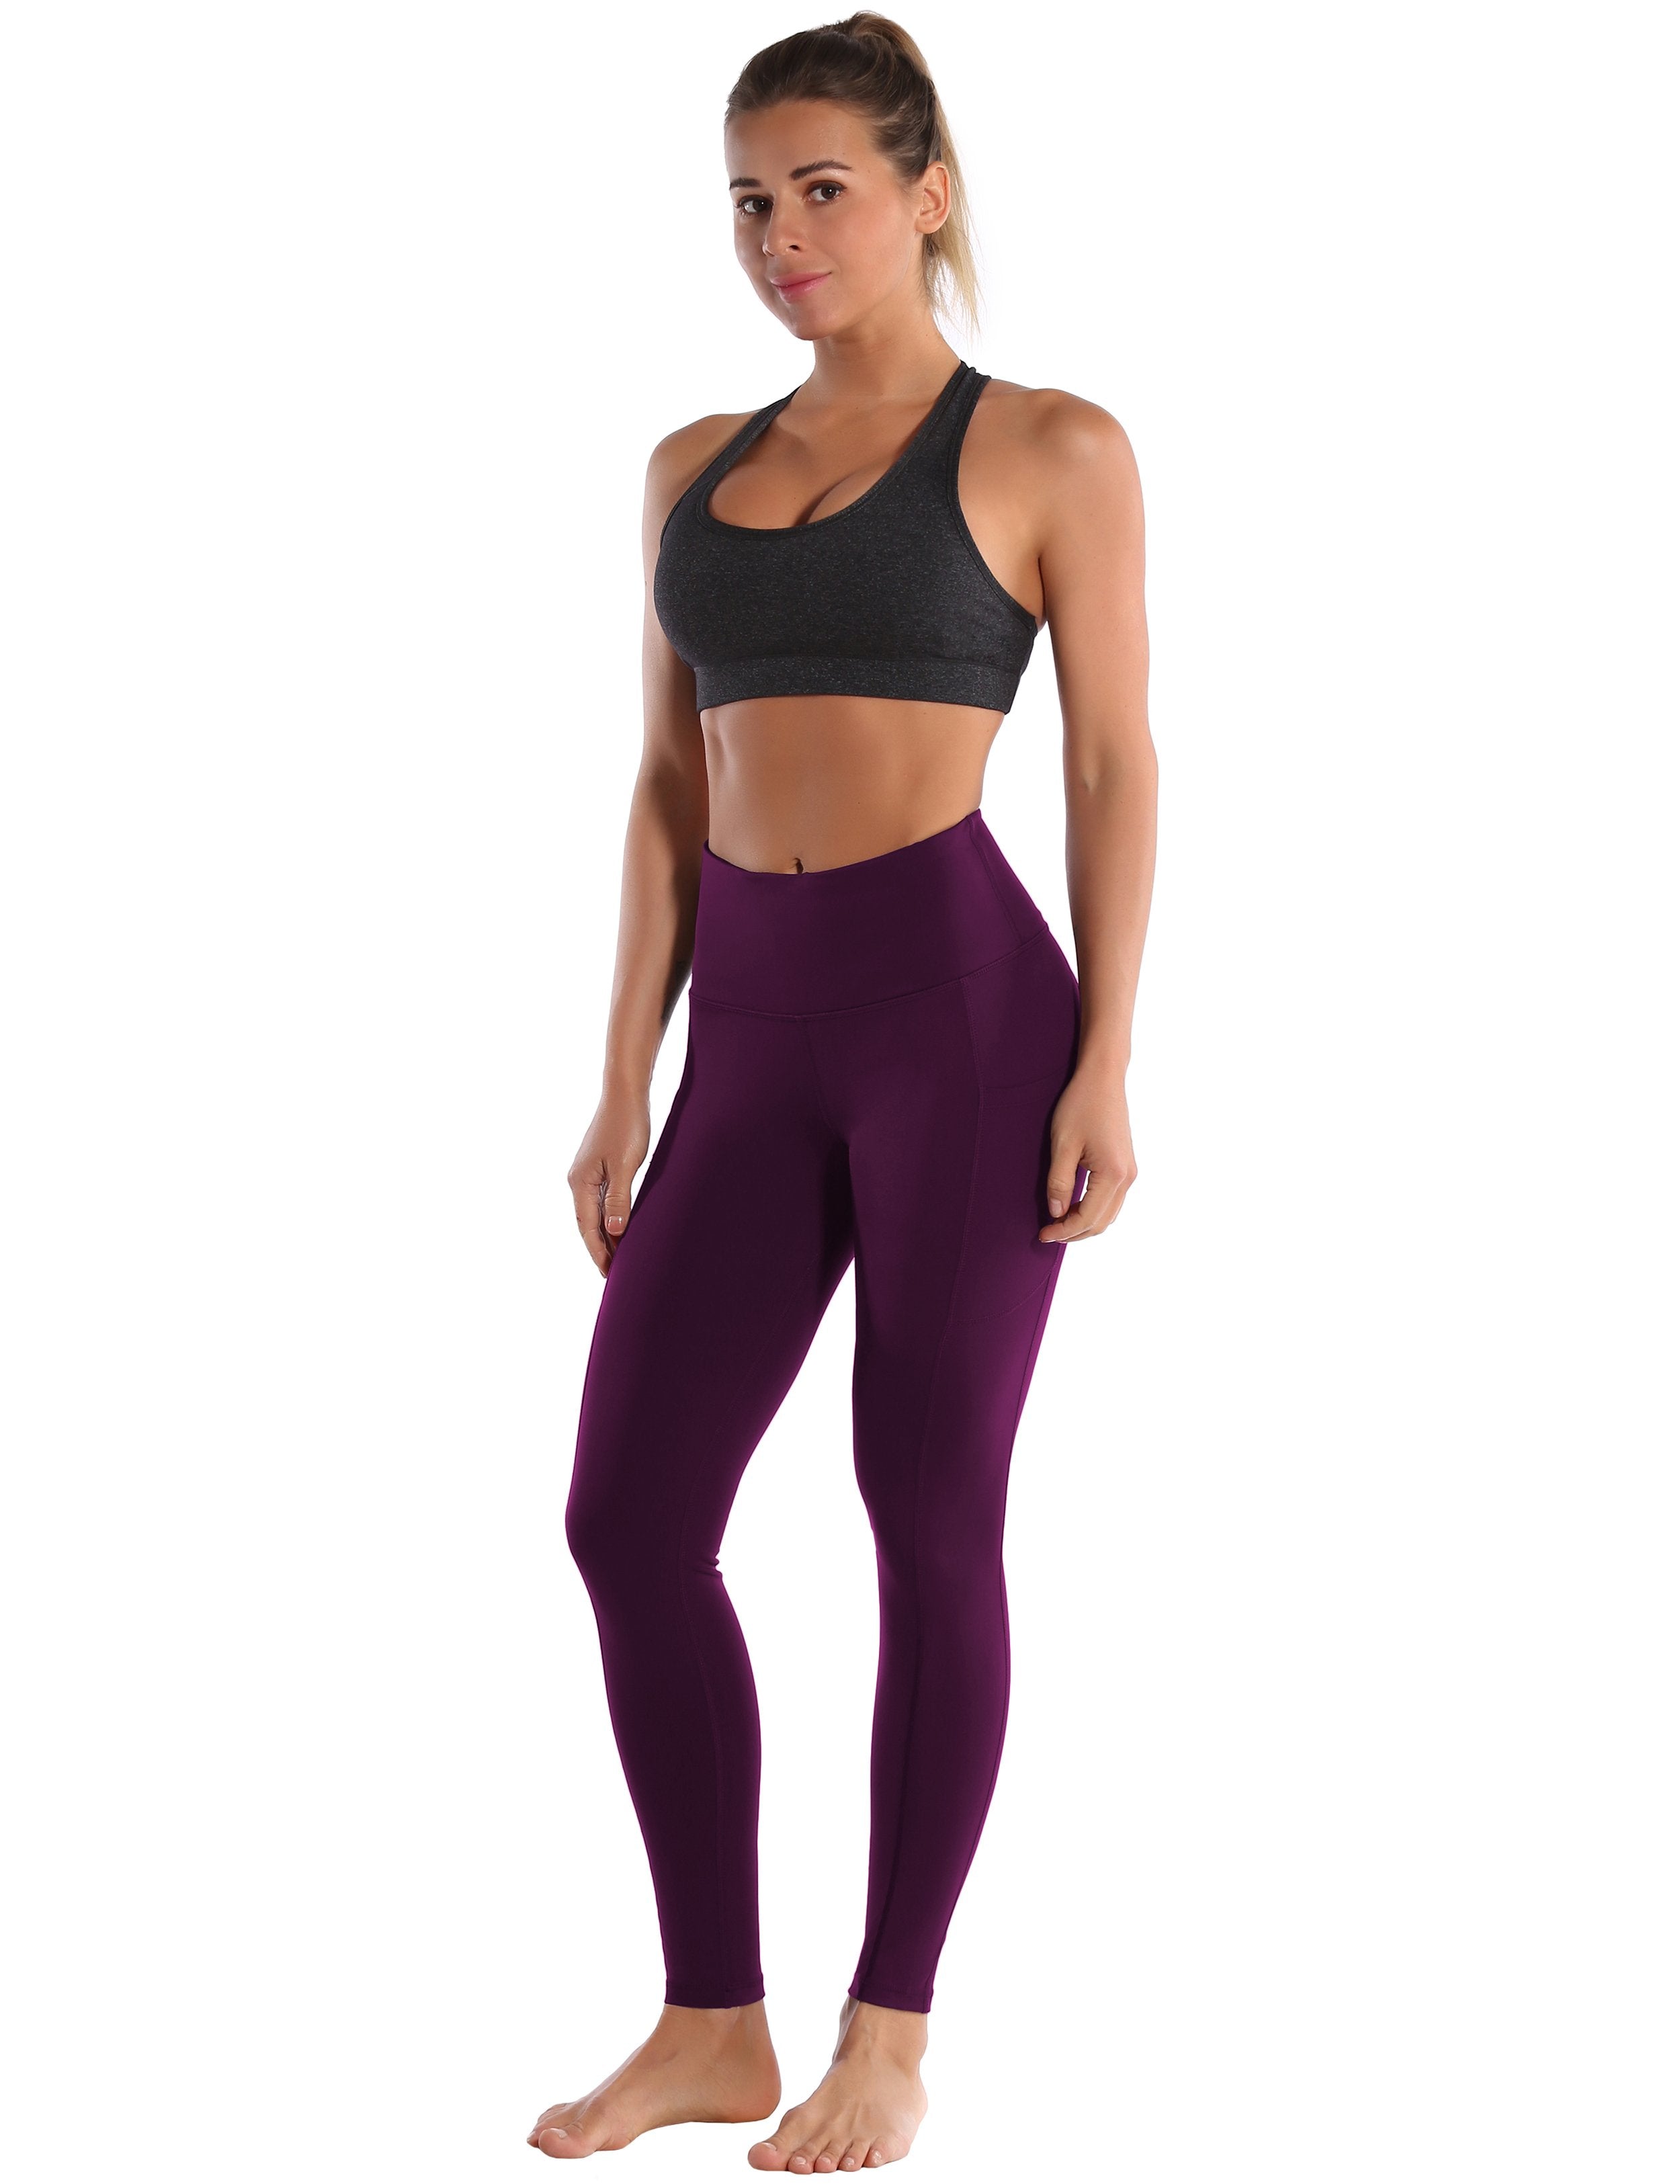 Hip Line Side Pockets Golf Pants grapevine Sexy Hip Line Side Pockets 75%Nylon/25%Spandex Fabric doesn't attract lint easily 4-way stretch No see-through Moisture-wicking Tummy control Inner pocket Two lengths